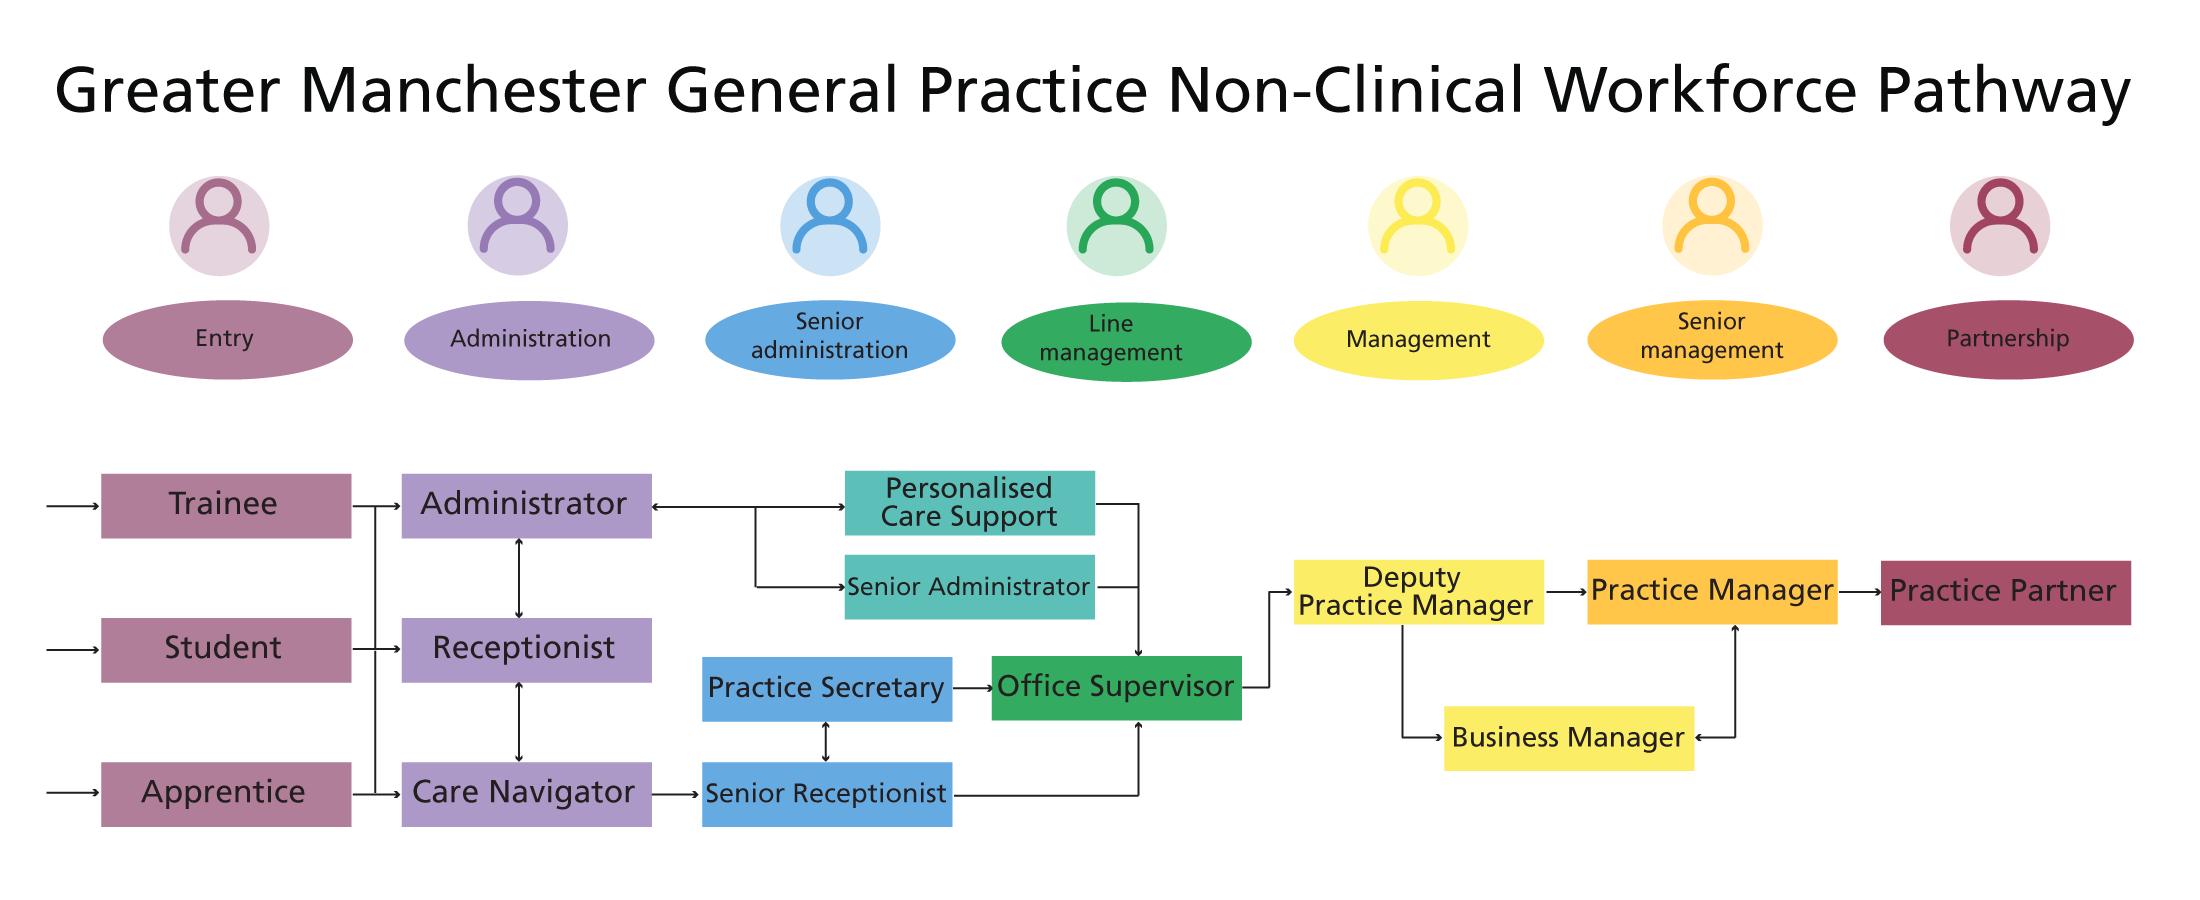 Greater Manchester General Practice Non-Clinical Workforce Pathway showing the different non-clinical roles from new entrant through to senior management and partnership roles